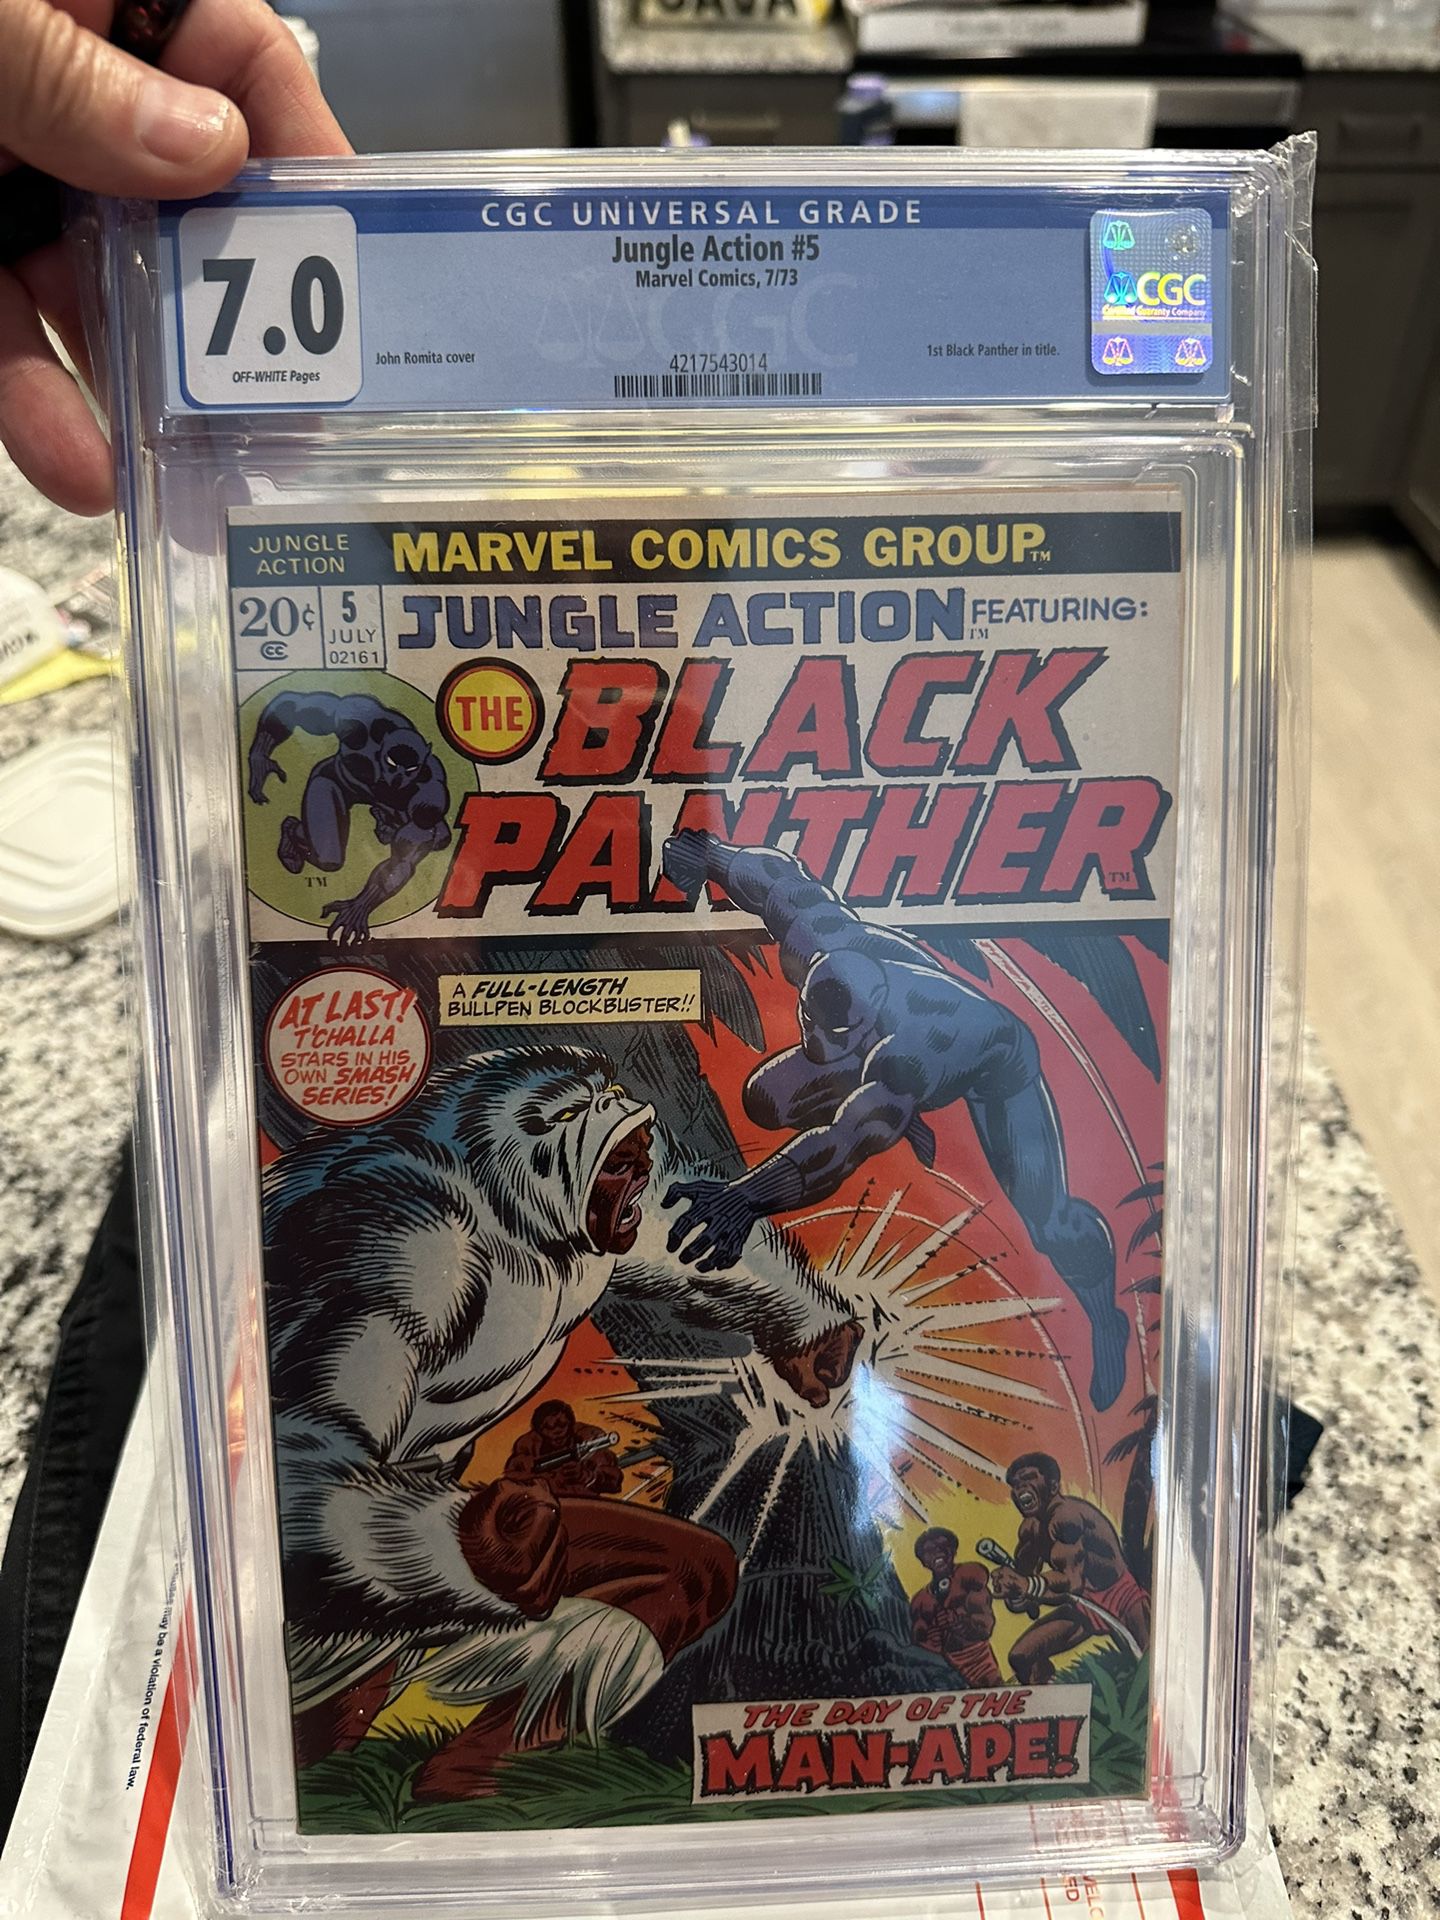 Sick Ass Black Panther Comment Certified Seven . Oh Two Hundred Dollars Solid Offer Only Valid Inquiries Thank You.